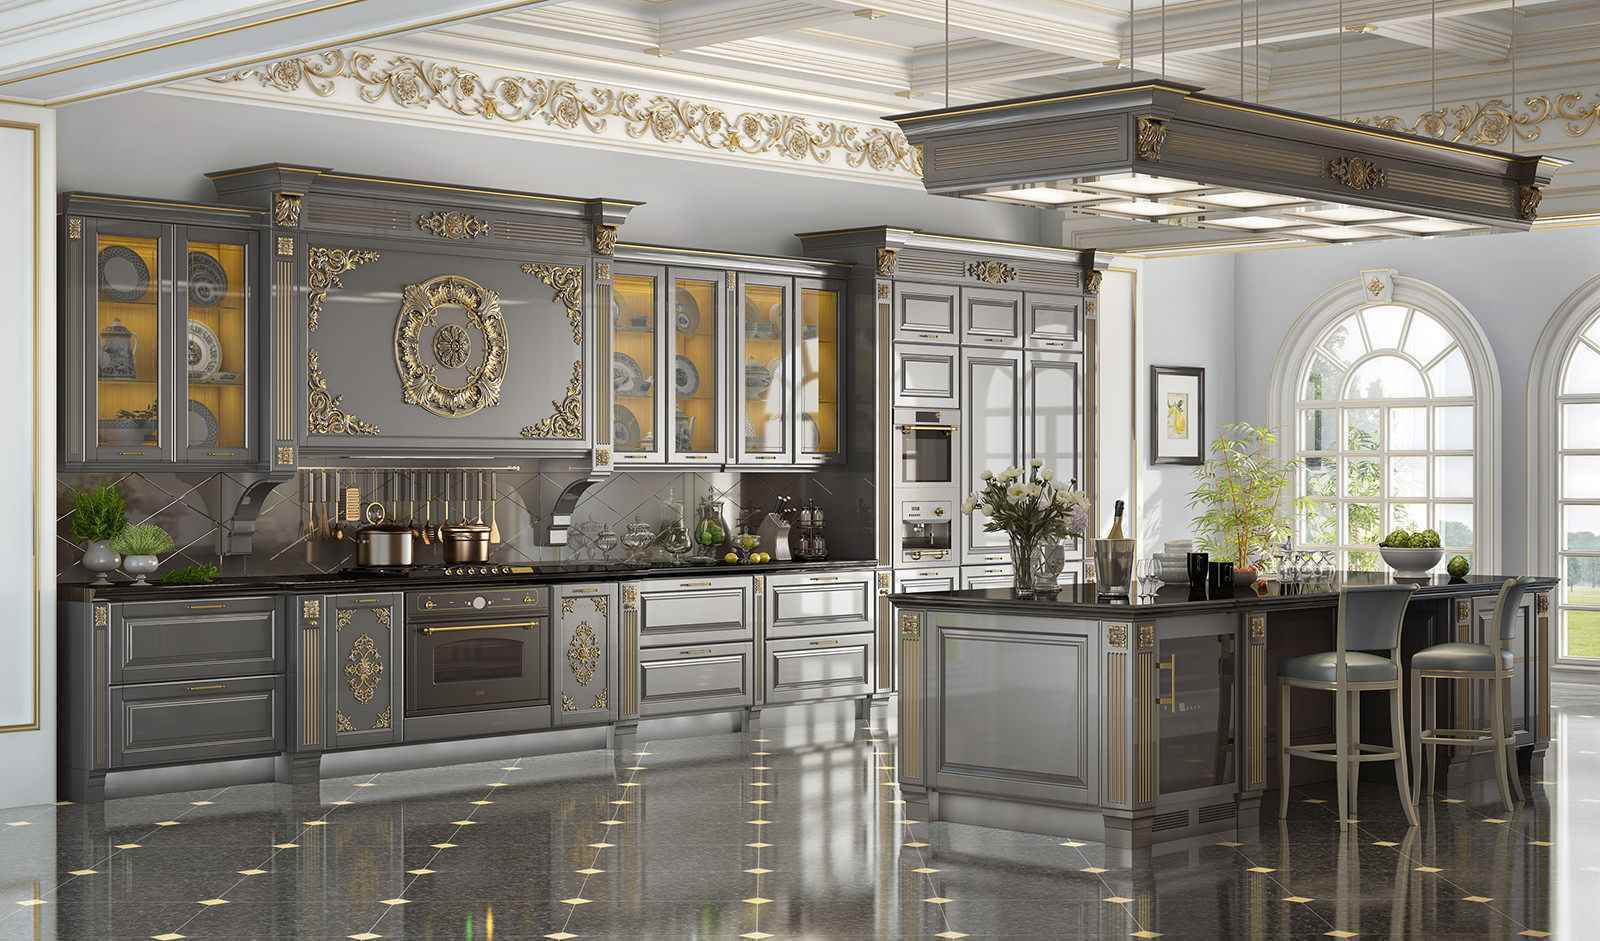 version of the unusual decor of the kitchen in a classic style